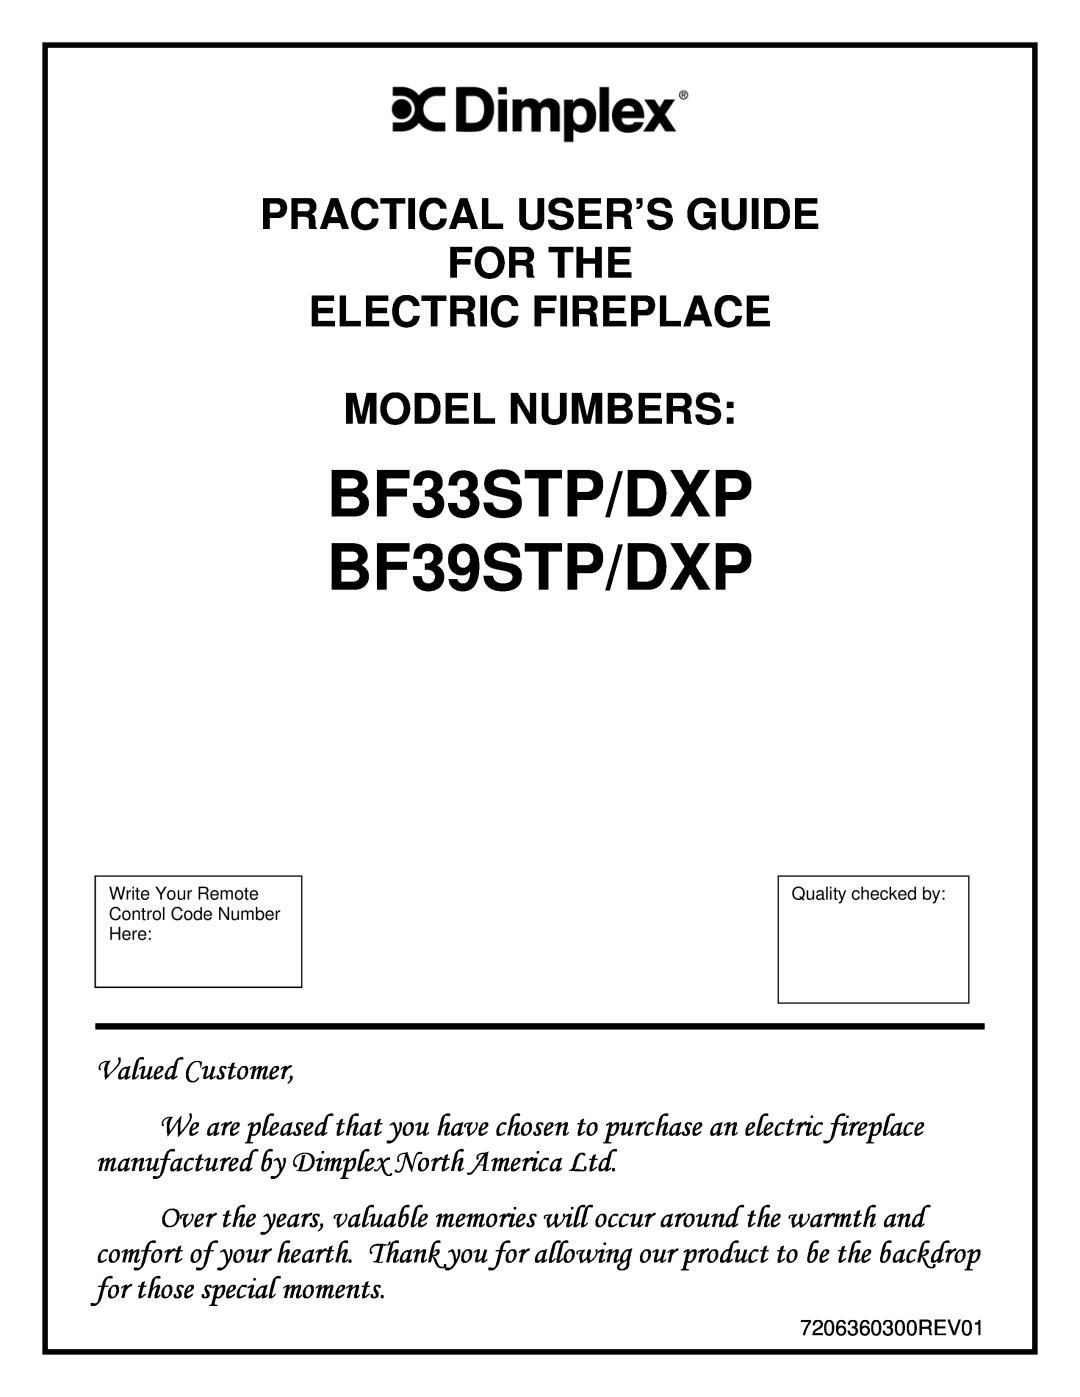 Dimplex manual BF33STP/DXP BF39STP/DXP, Practical User’S Guide For The Electric Fireplace, Model Numbers 